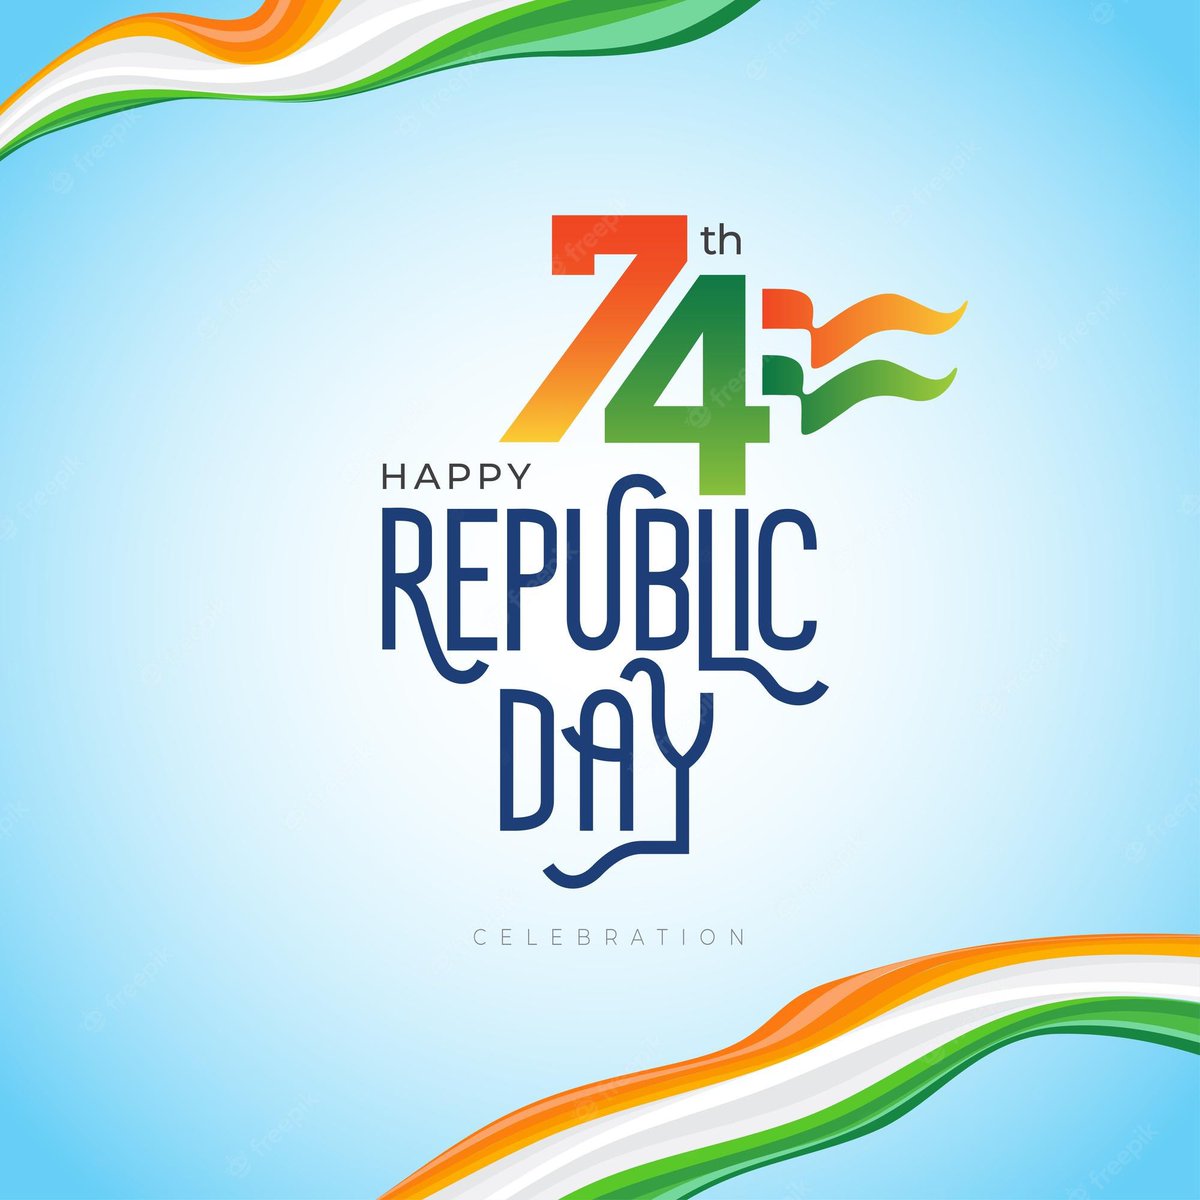 Happy Republic Day to #India 

I would like to congratulate you and offer my best wishes on India's #74thRepublicDay